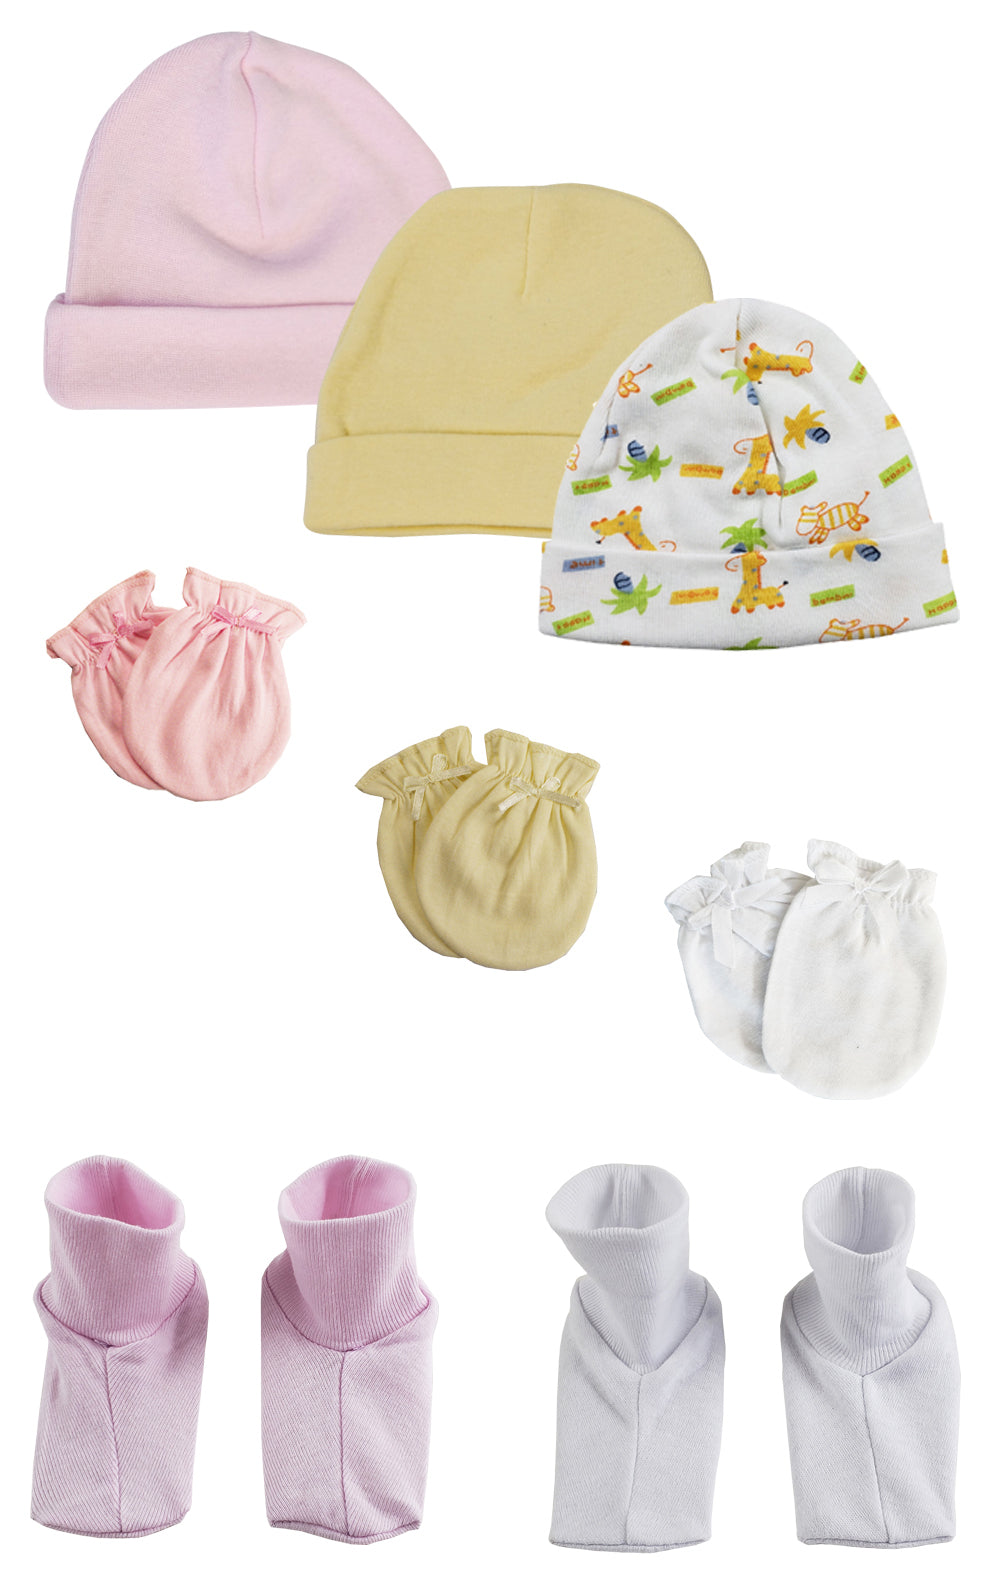 Baby Girl Infant Caps, Booties and Mittens (Pack of 8)